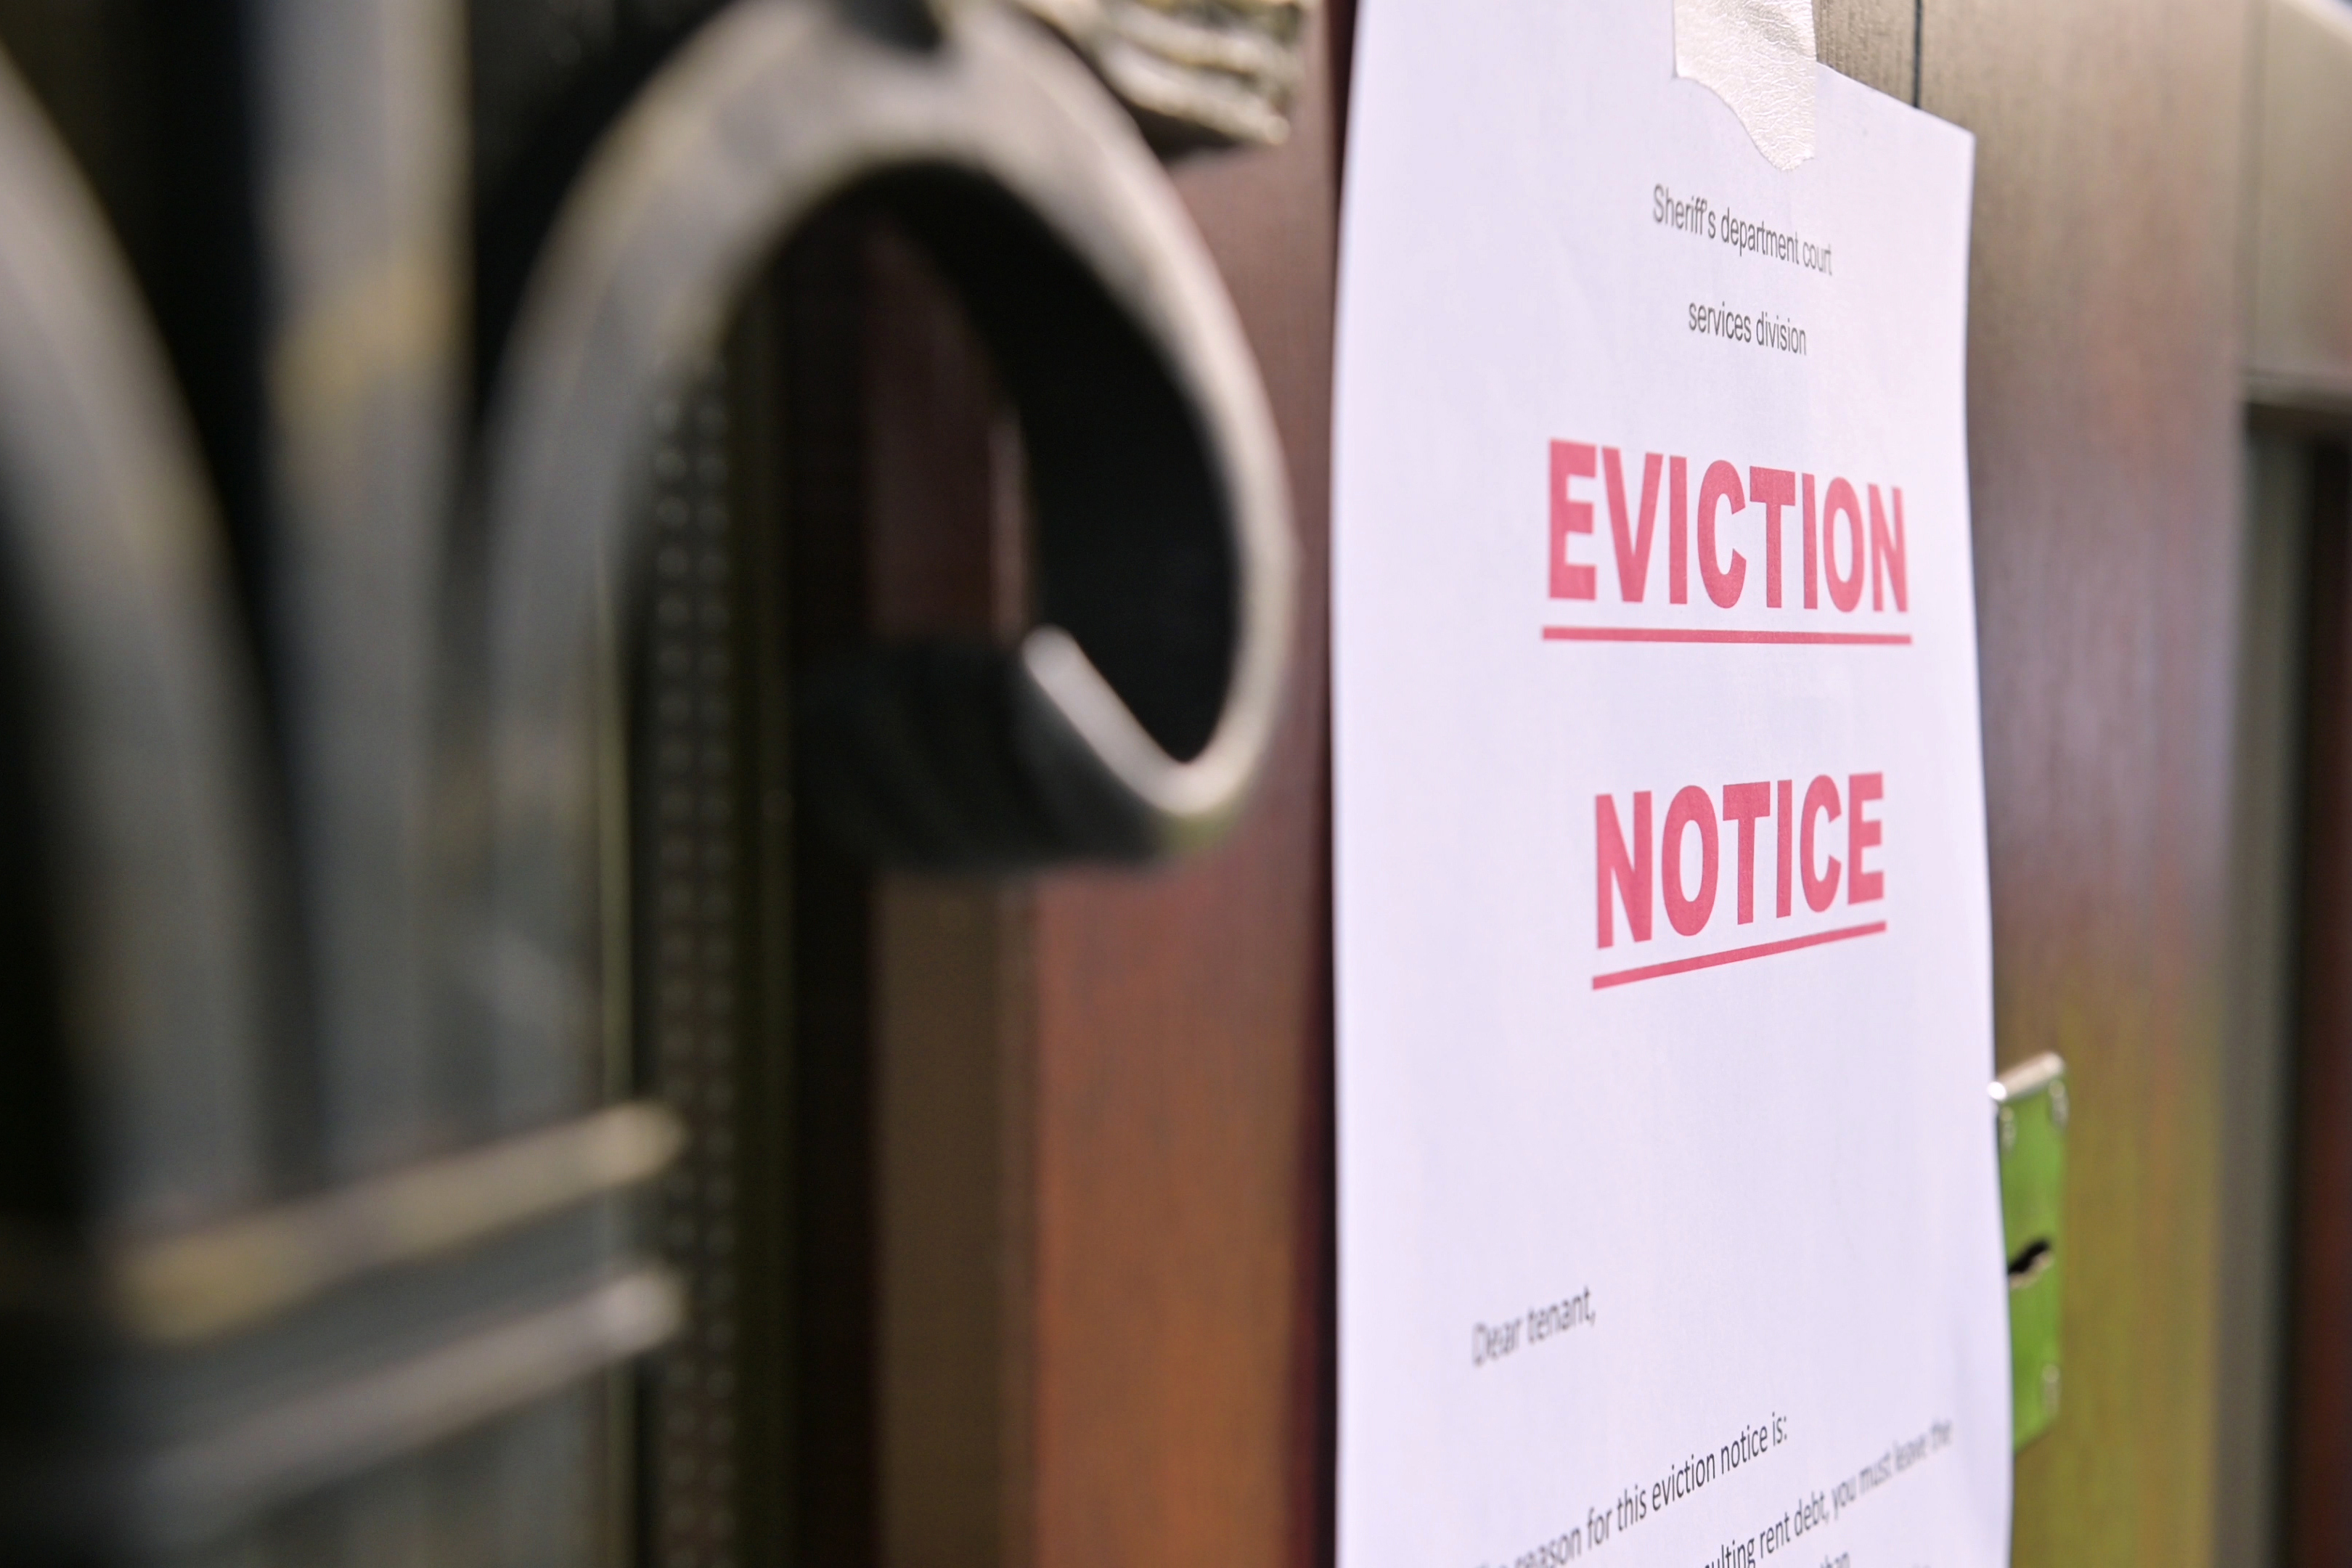 Seeking out professional help and resources is a key recommendation for anyone facing eviction.